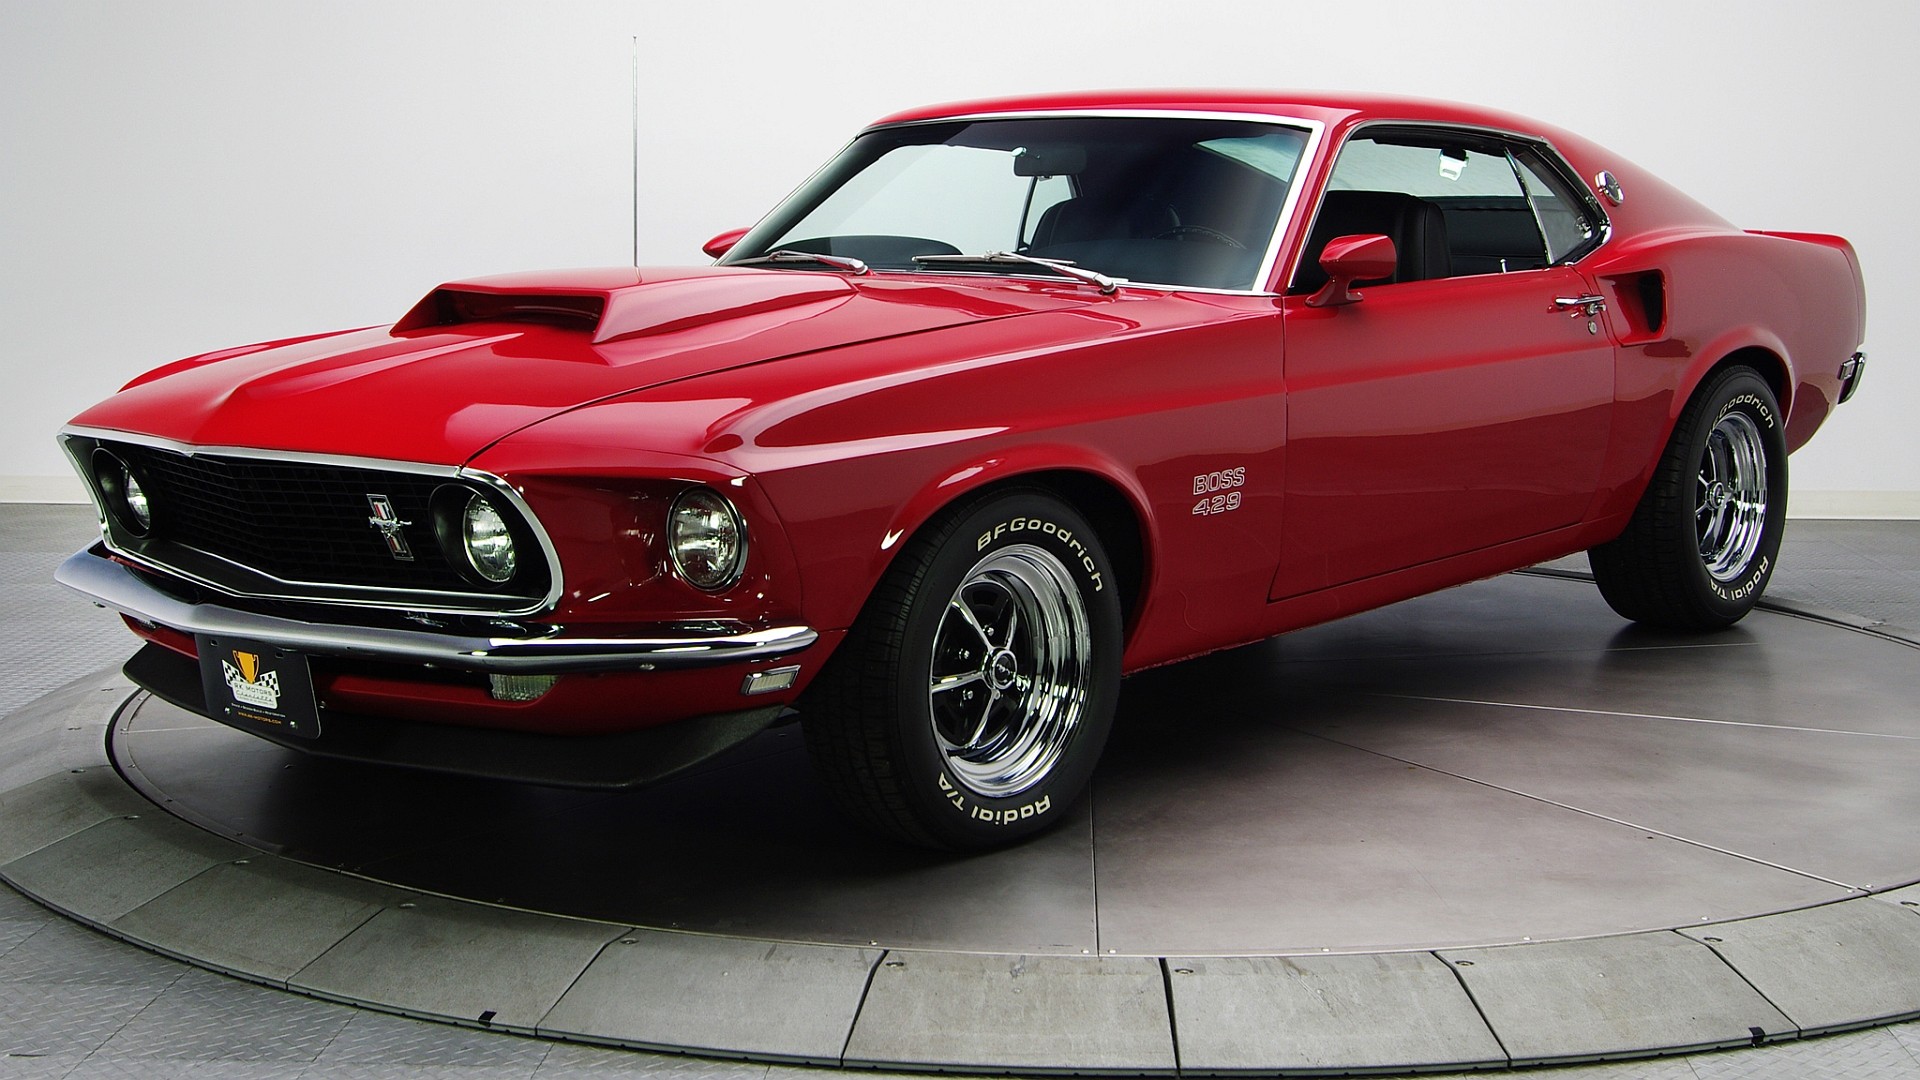 General 1920x1080 car Ford Mustang vehicle red cars Ford muscle cars American cars